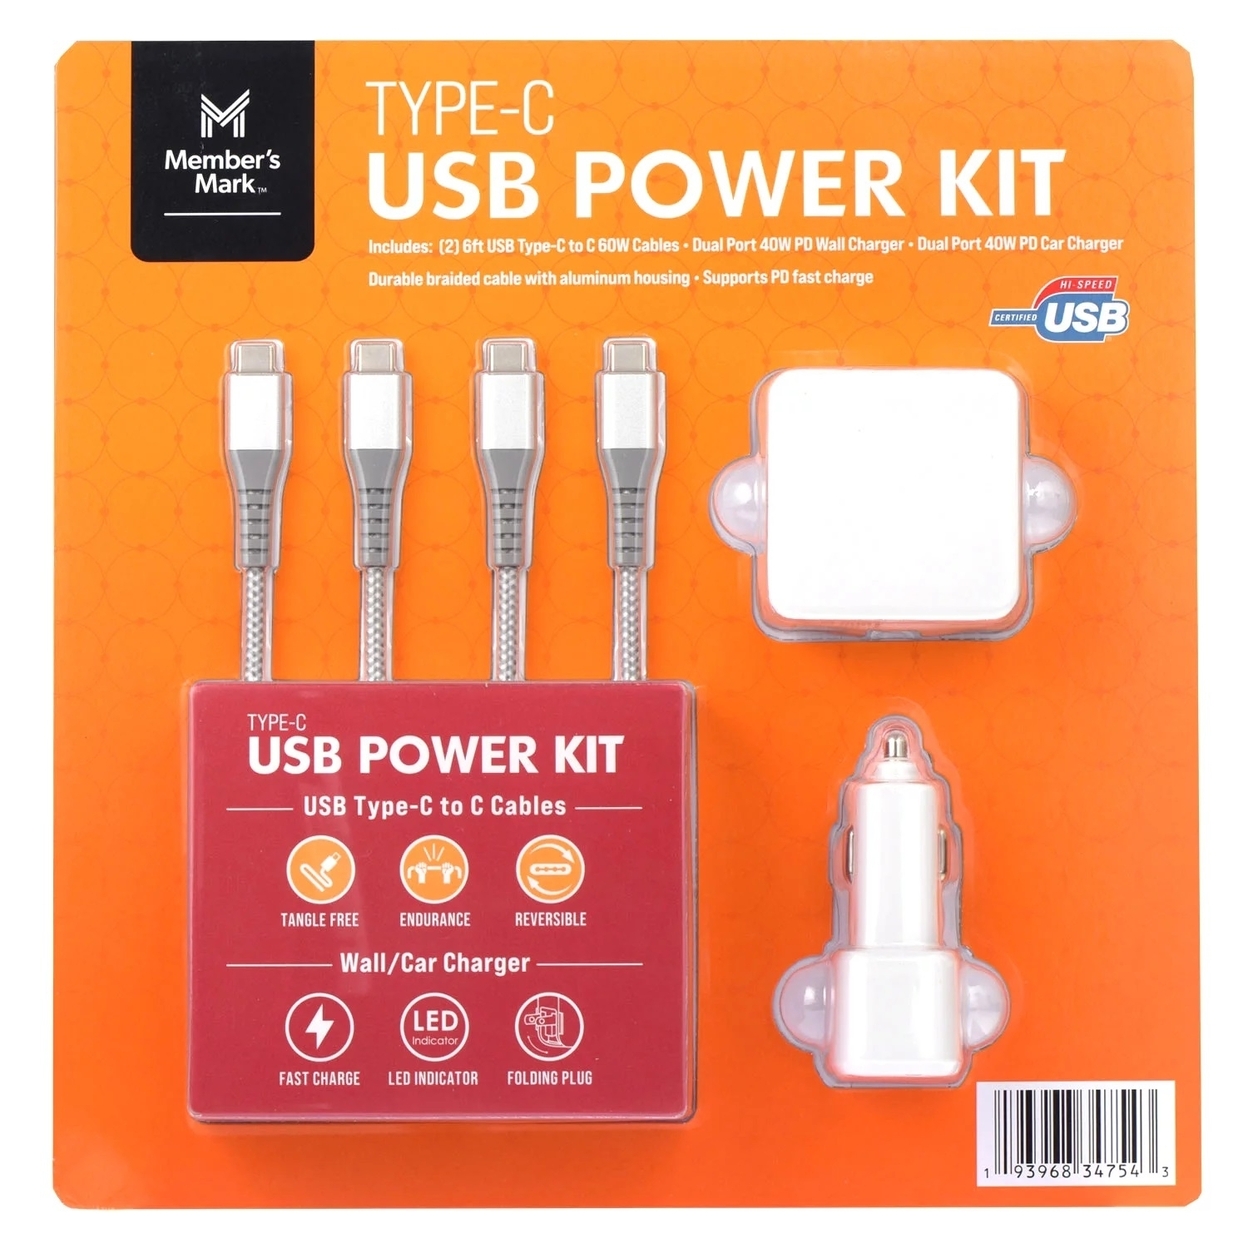 Member's Mark USB PD Power Pack For Type-C: Car & Wall Charger & 2 USB-C Cable